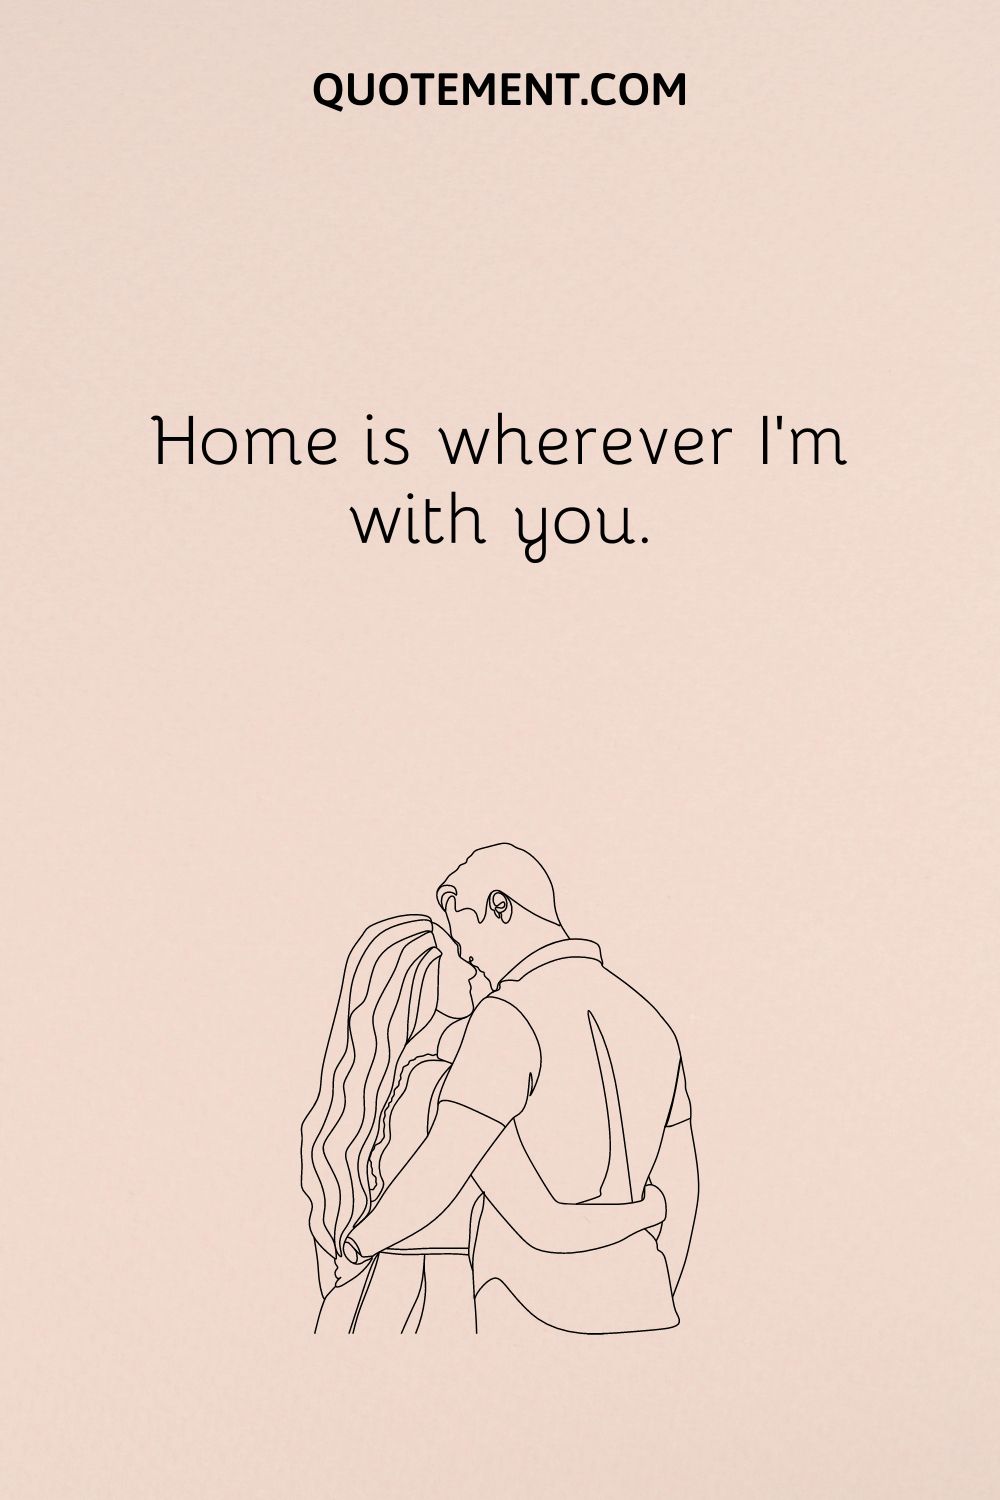 Home is wherever I’m with you.